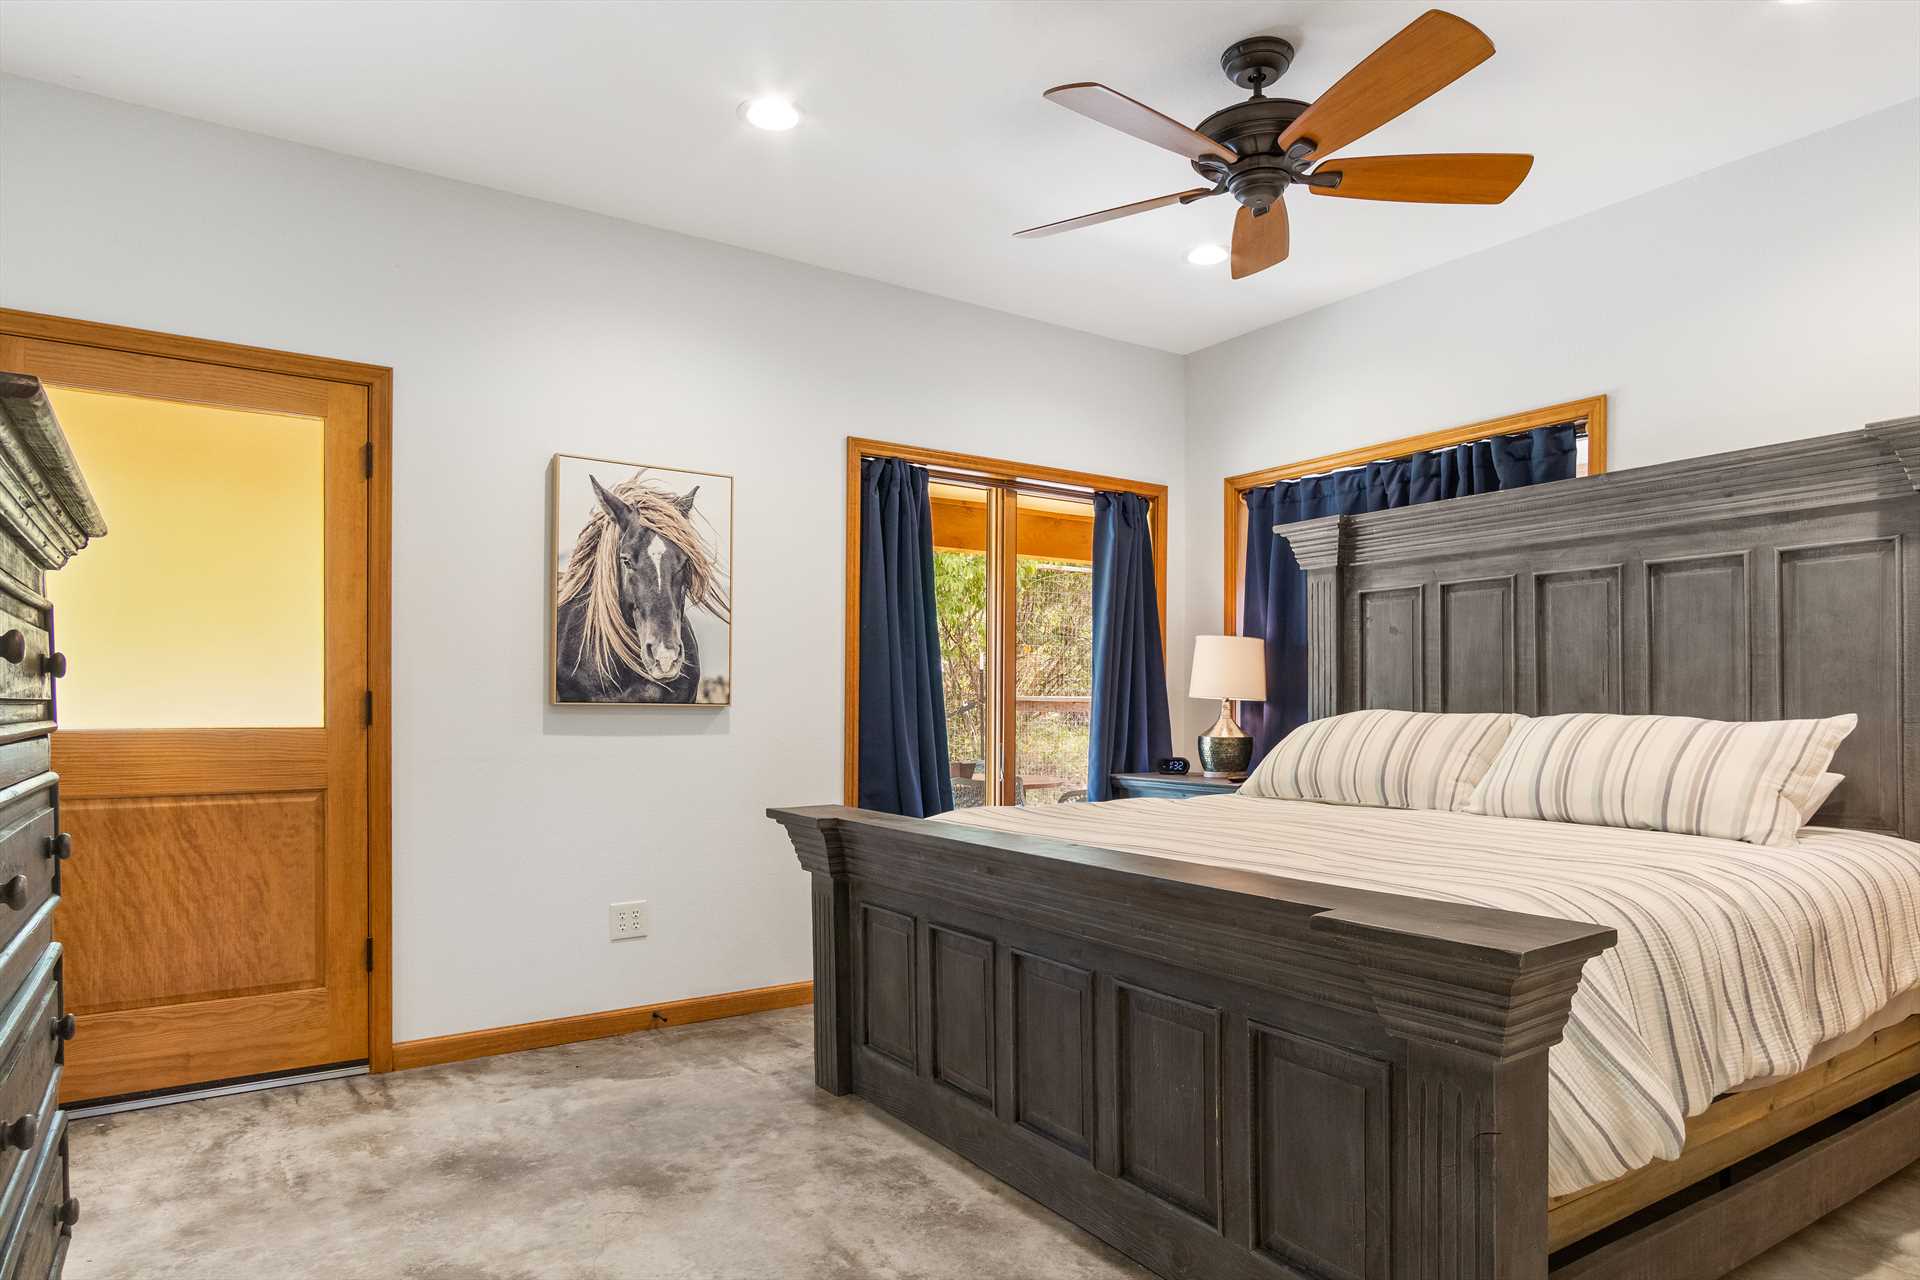                                                 A regal and comfortable king-sized bed can be found in the ranch's master bedroom, complete with fresh linens (as are all the sleeping spaces here).